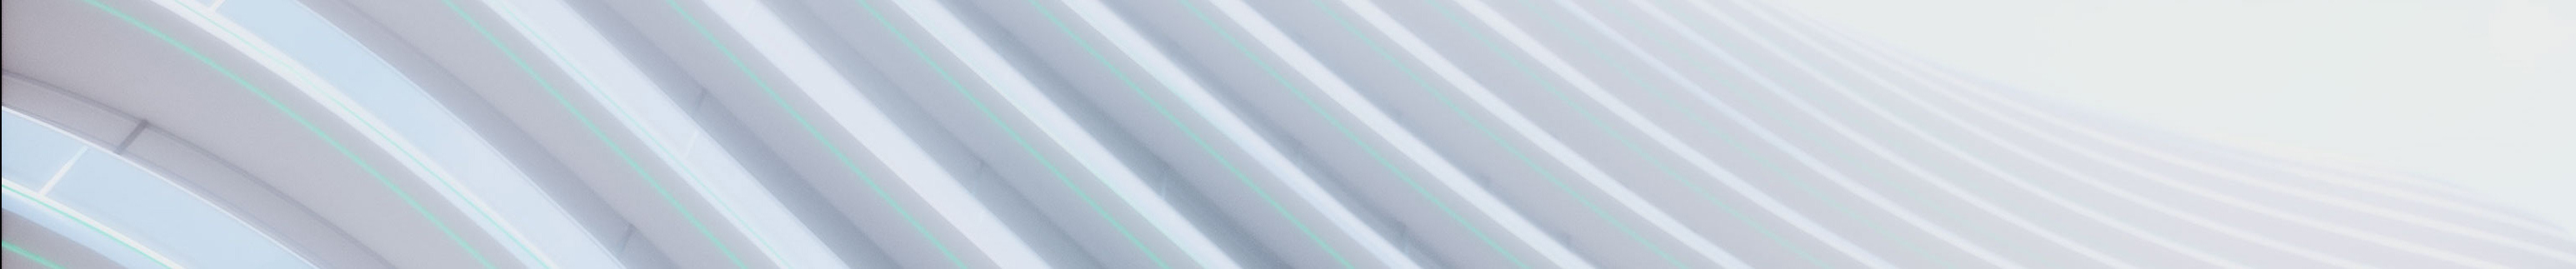 PC Architects's profile banner